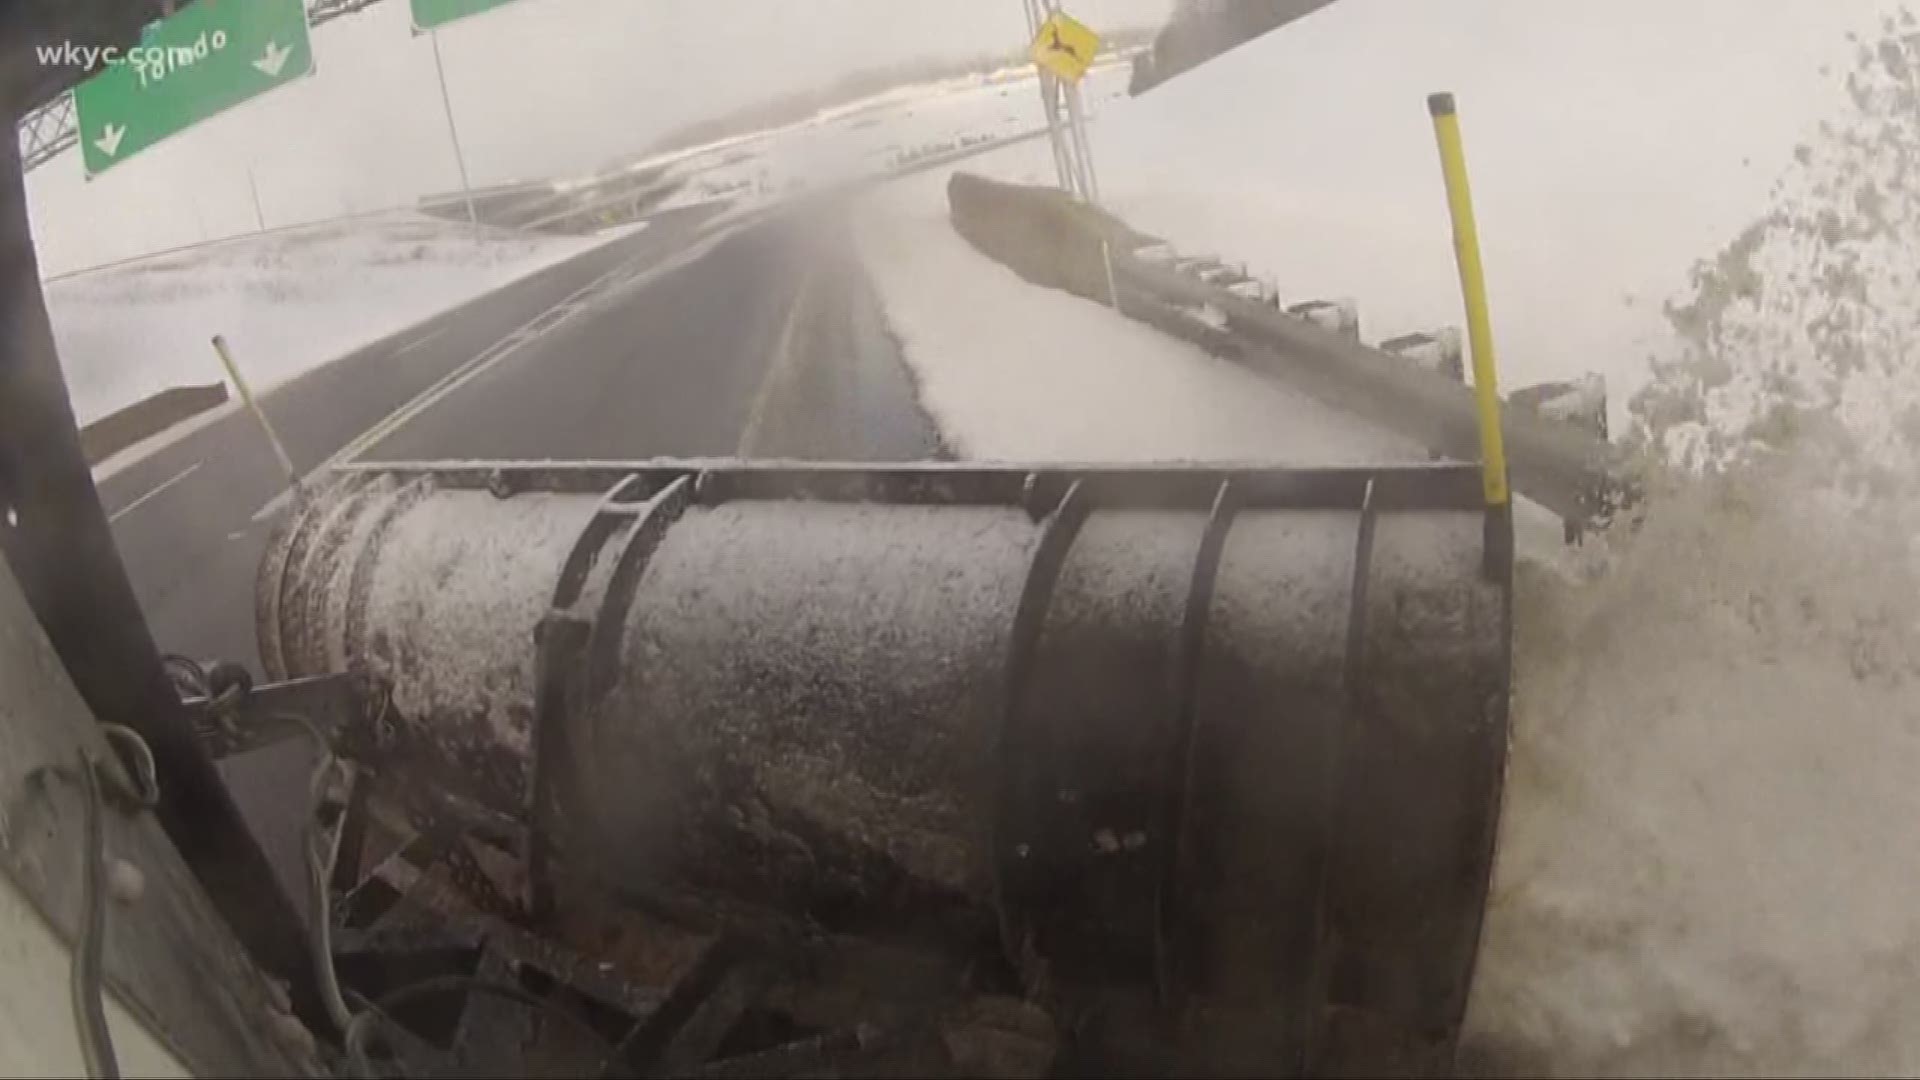 Lindsey Buckingham reports what ODOT is doing to prepare for the coming winter storm.